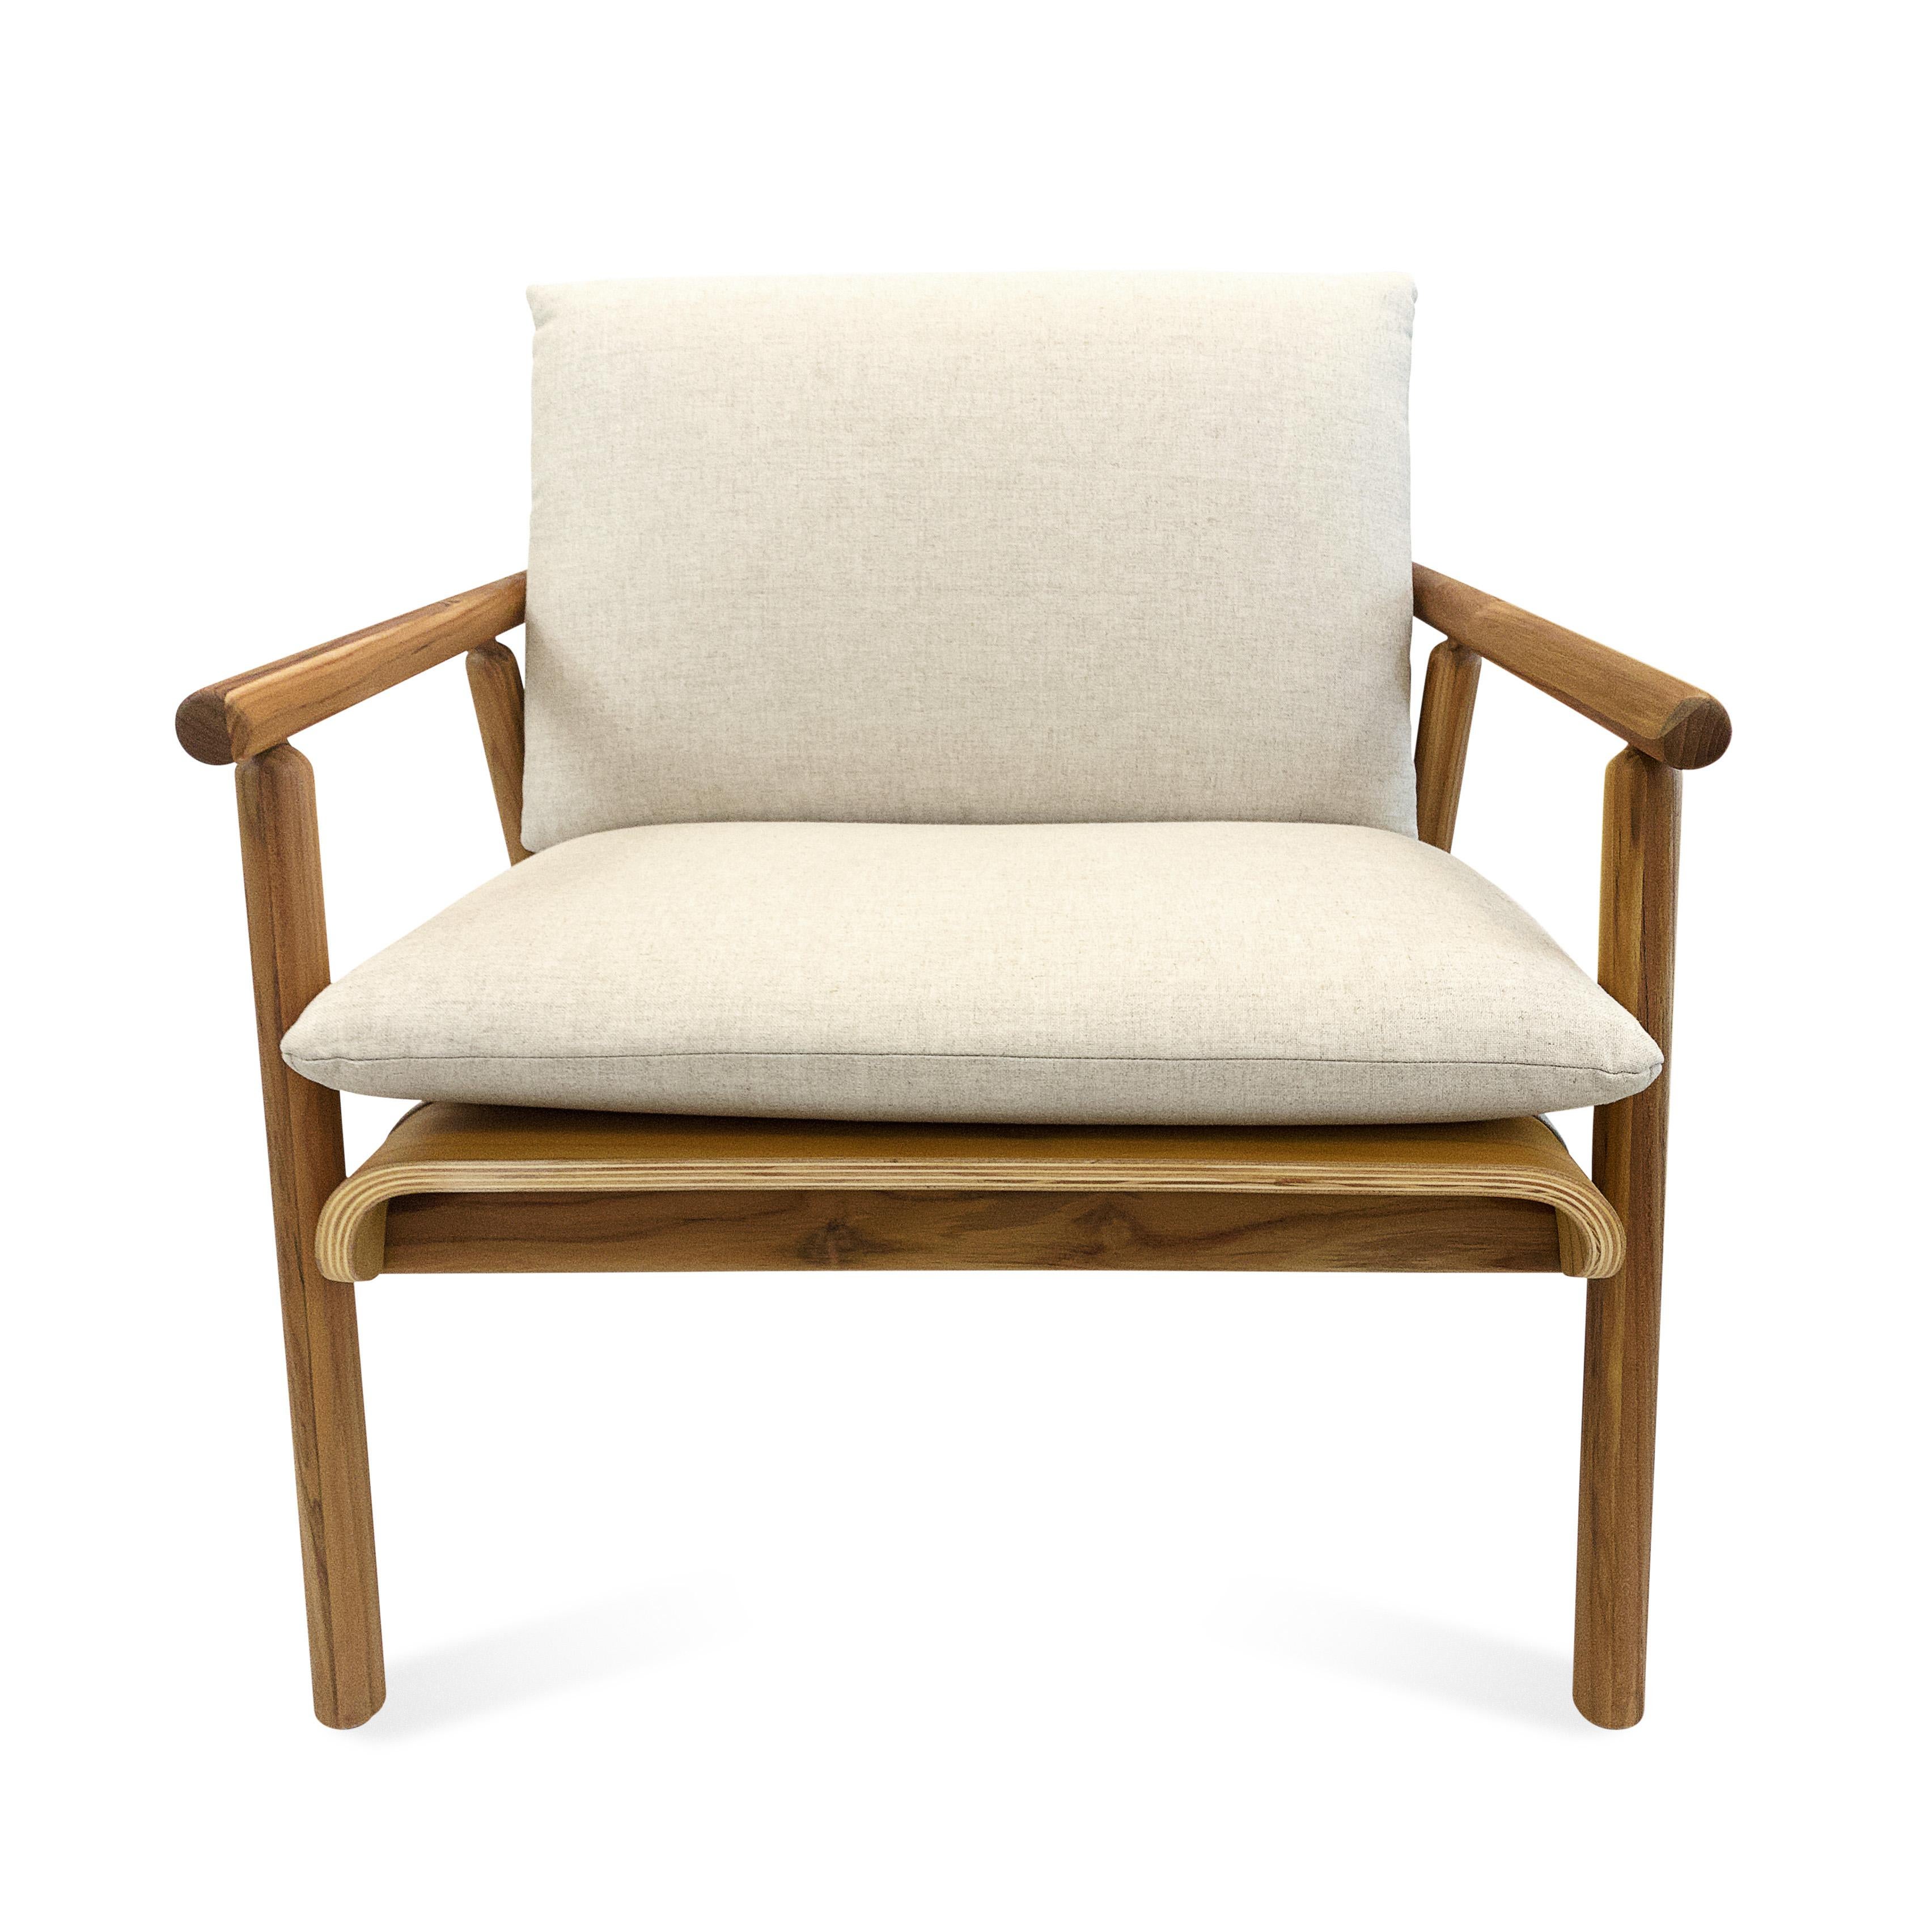 Tai Armchair in Teak Wood Finish with Light Beige Fabric Cushions For Sale 6